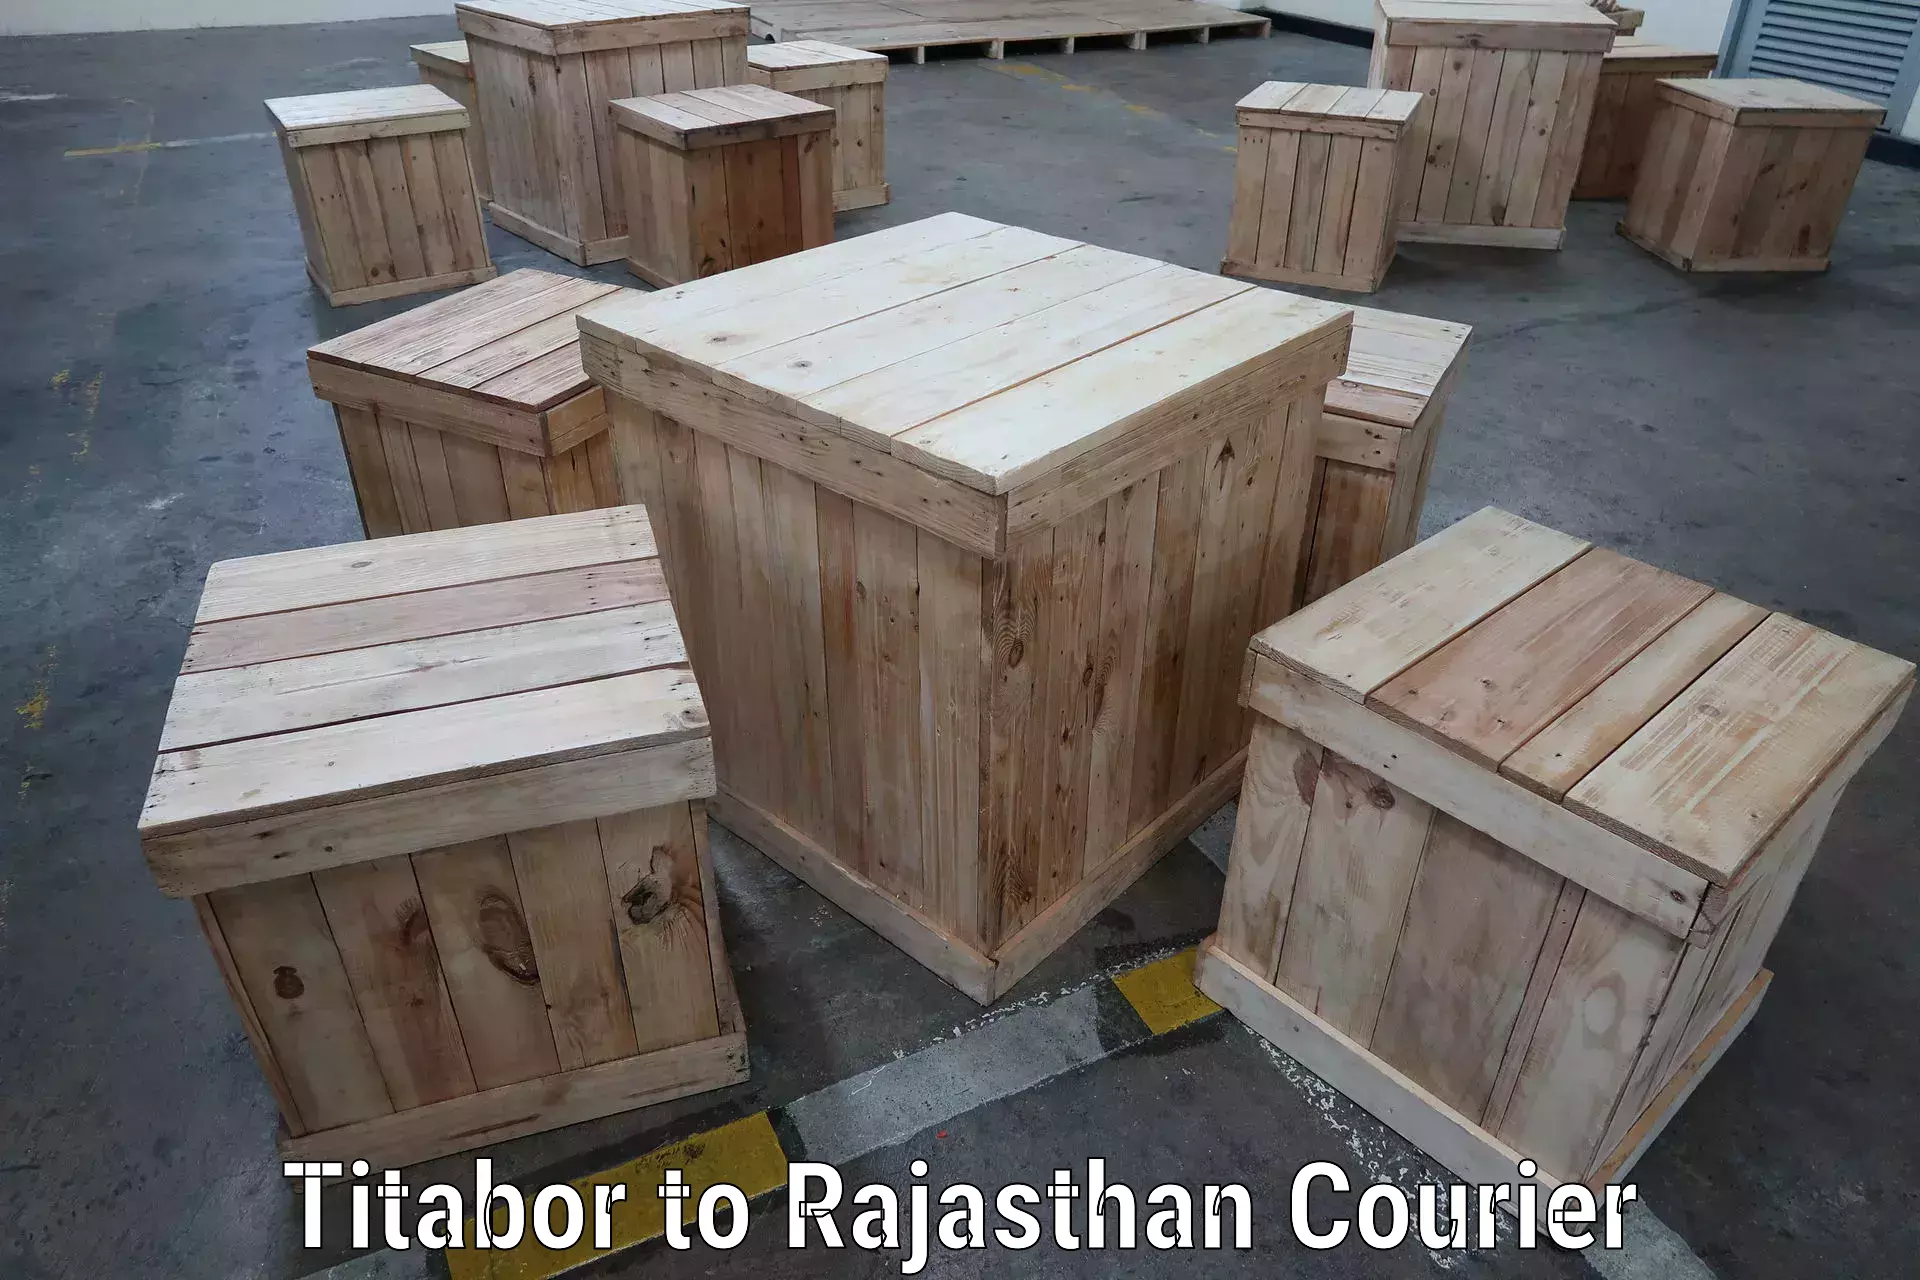 Next-day freight services Titabor to Rajasthan